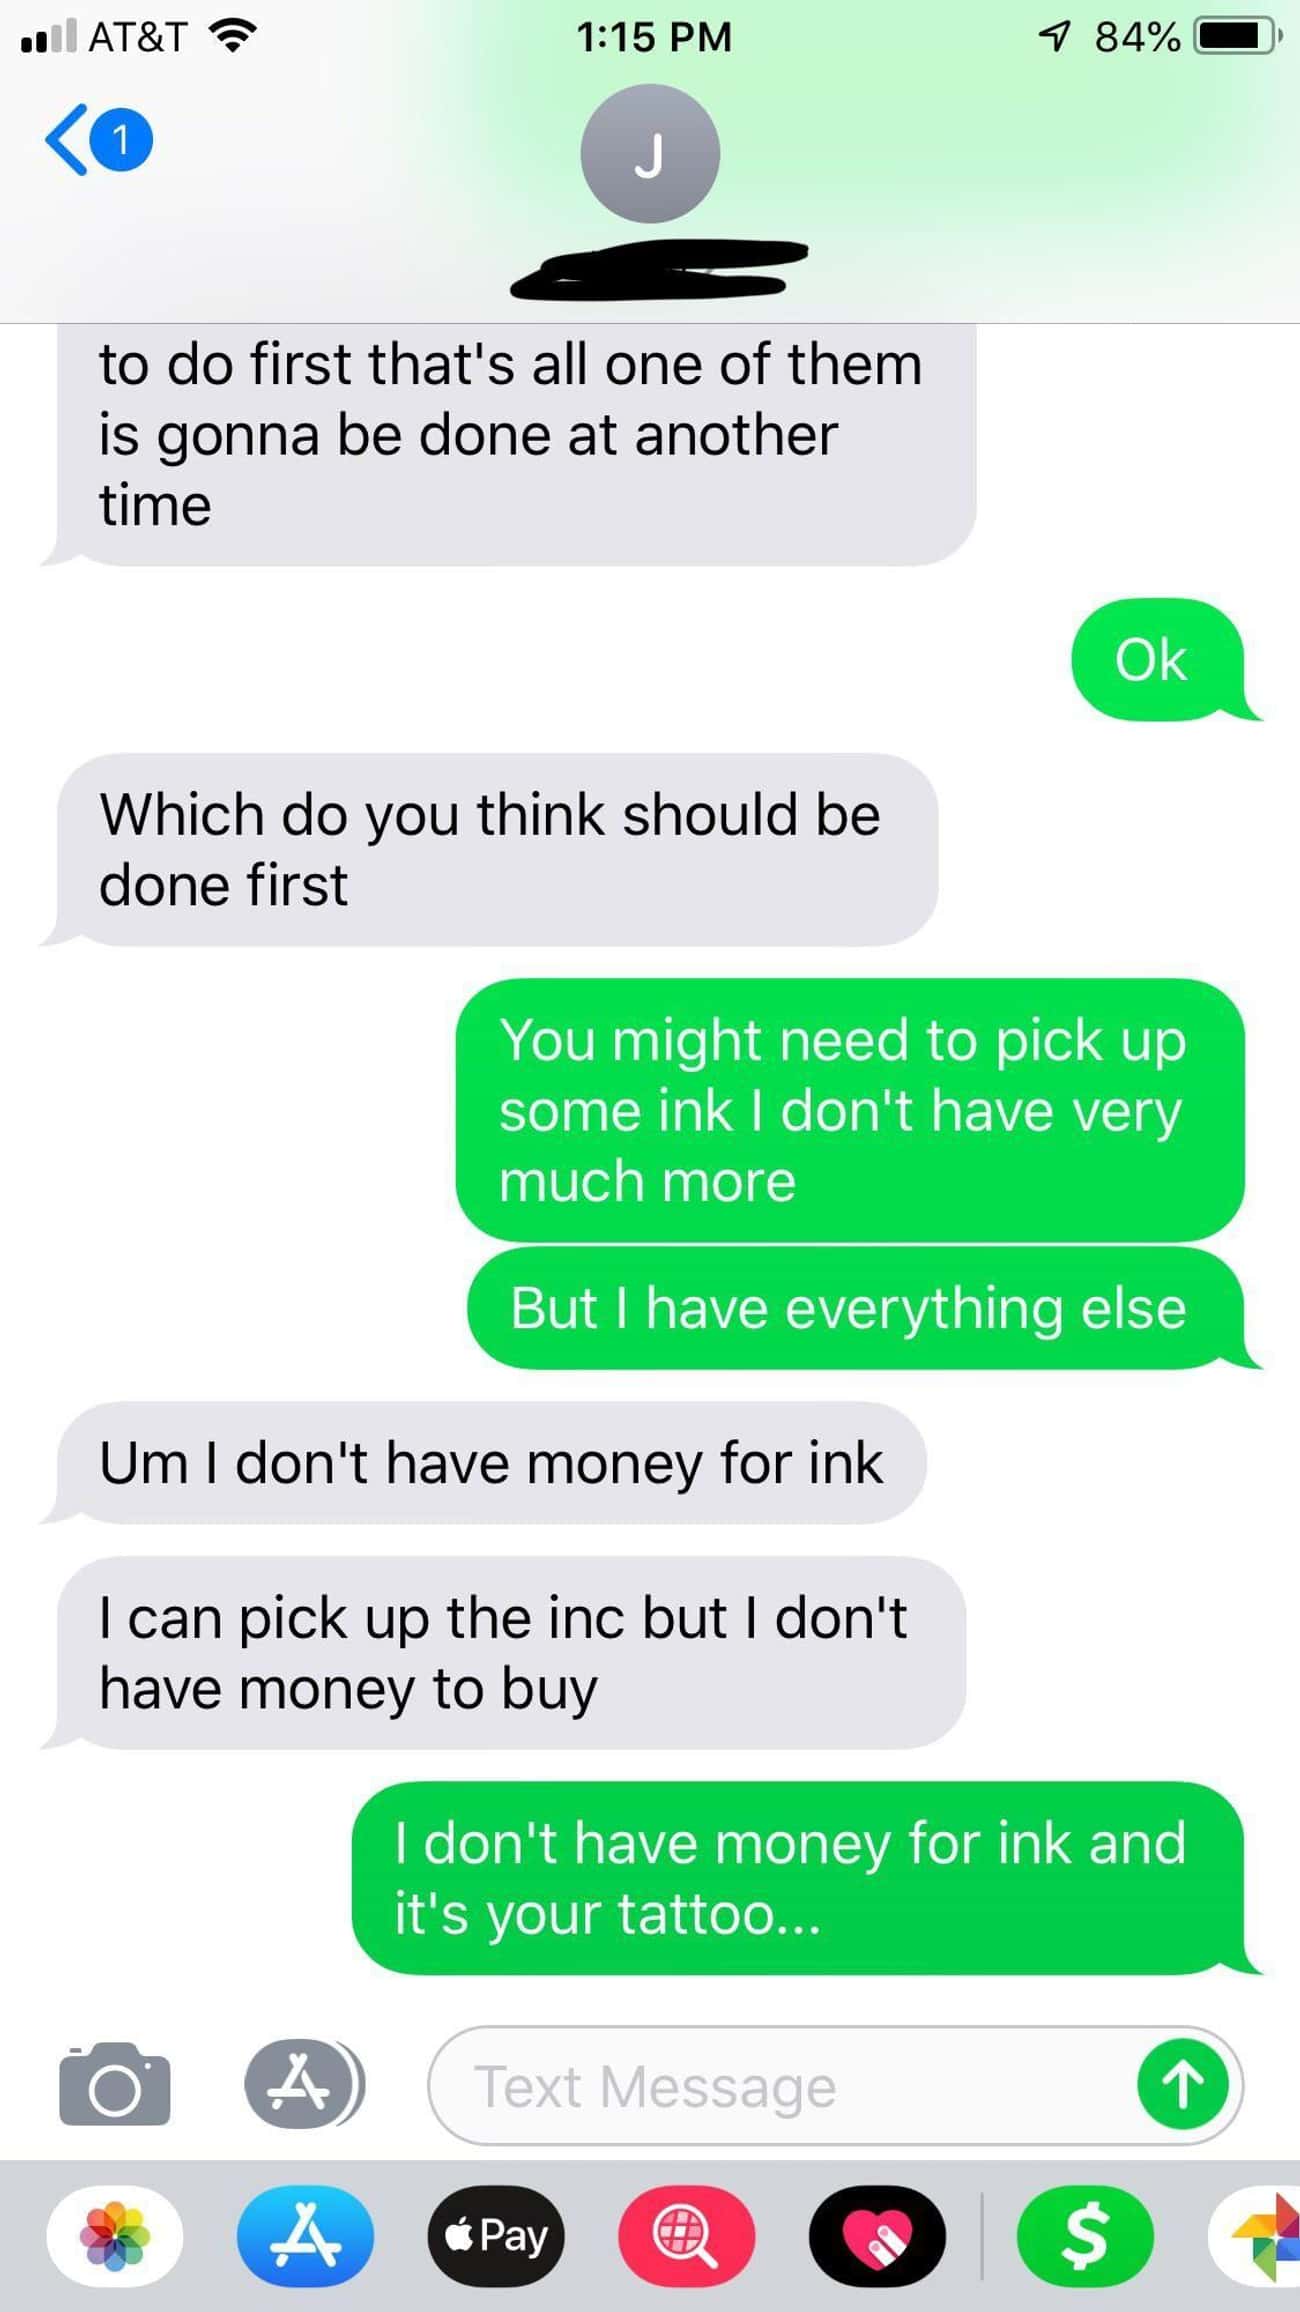 Wants A Free Tattoo But Doesn't Want To Provide The Ink